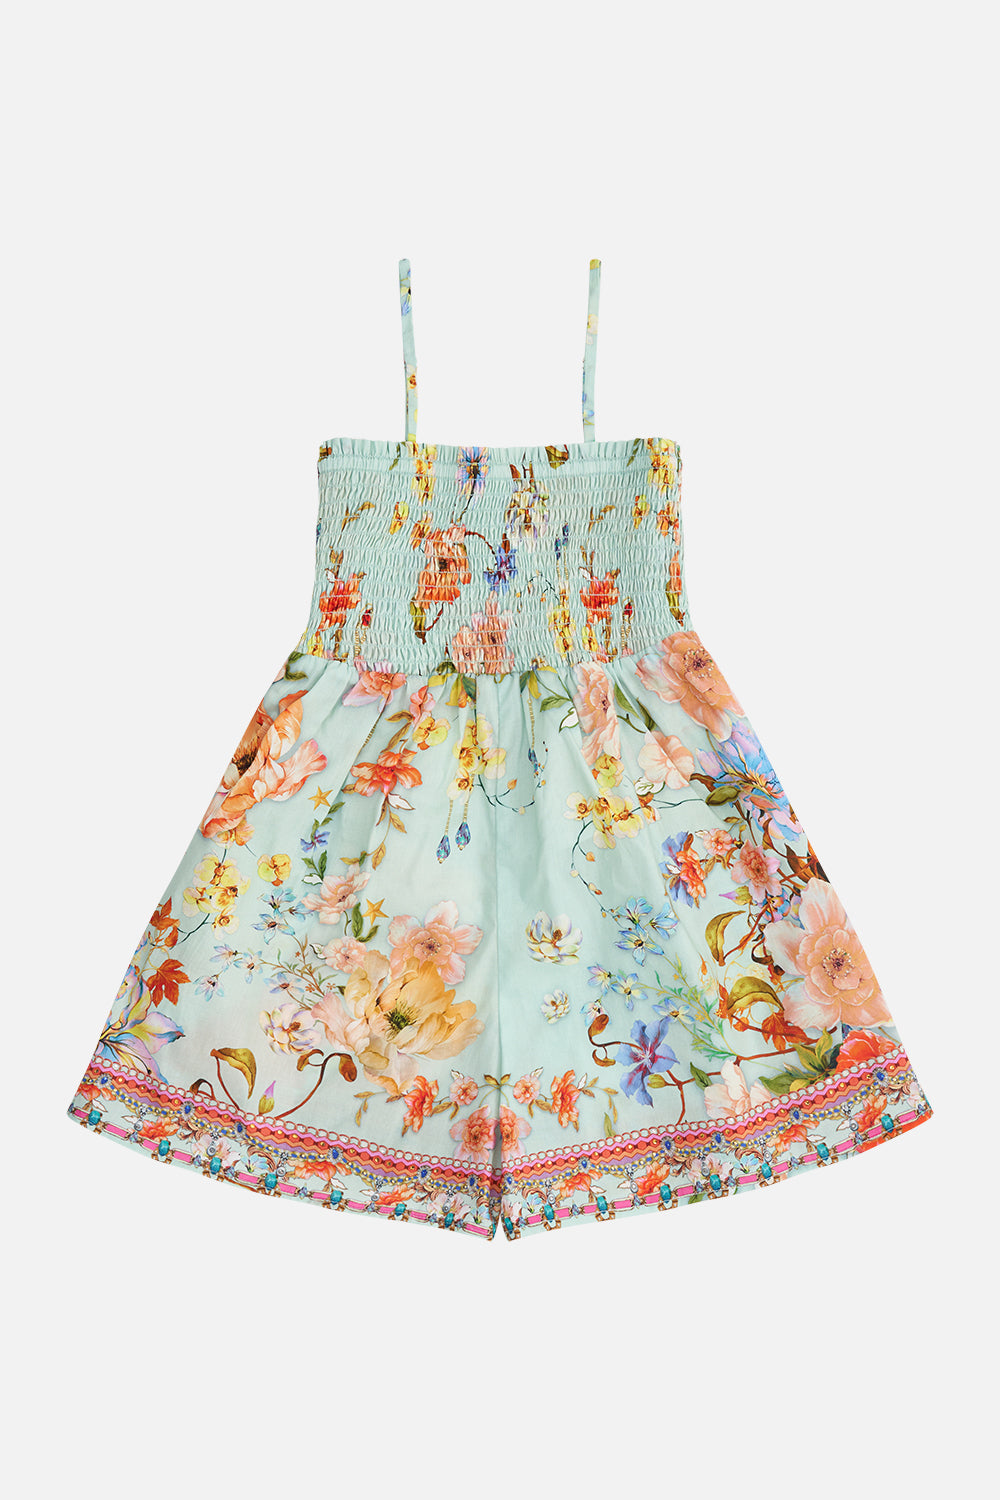 Product view of MILLA By CAMILLA kids floral print playsuit in Talk The Walk print